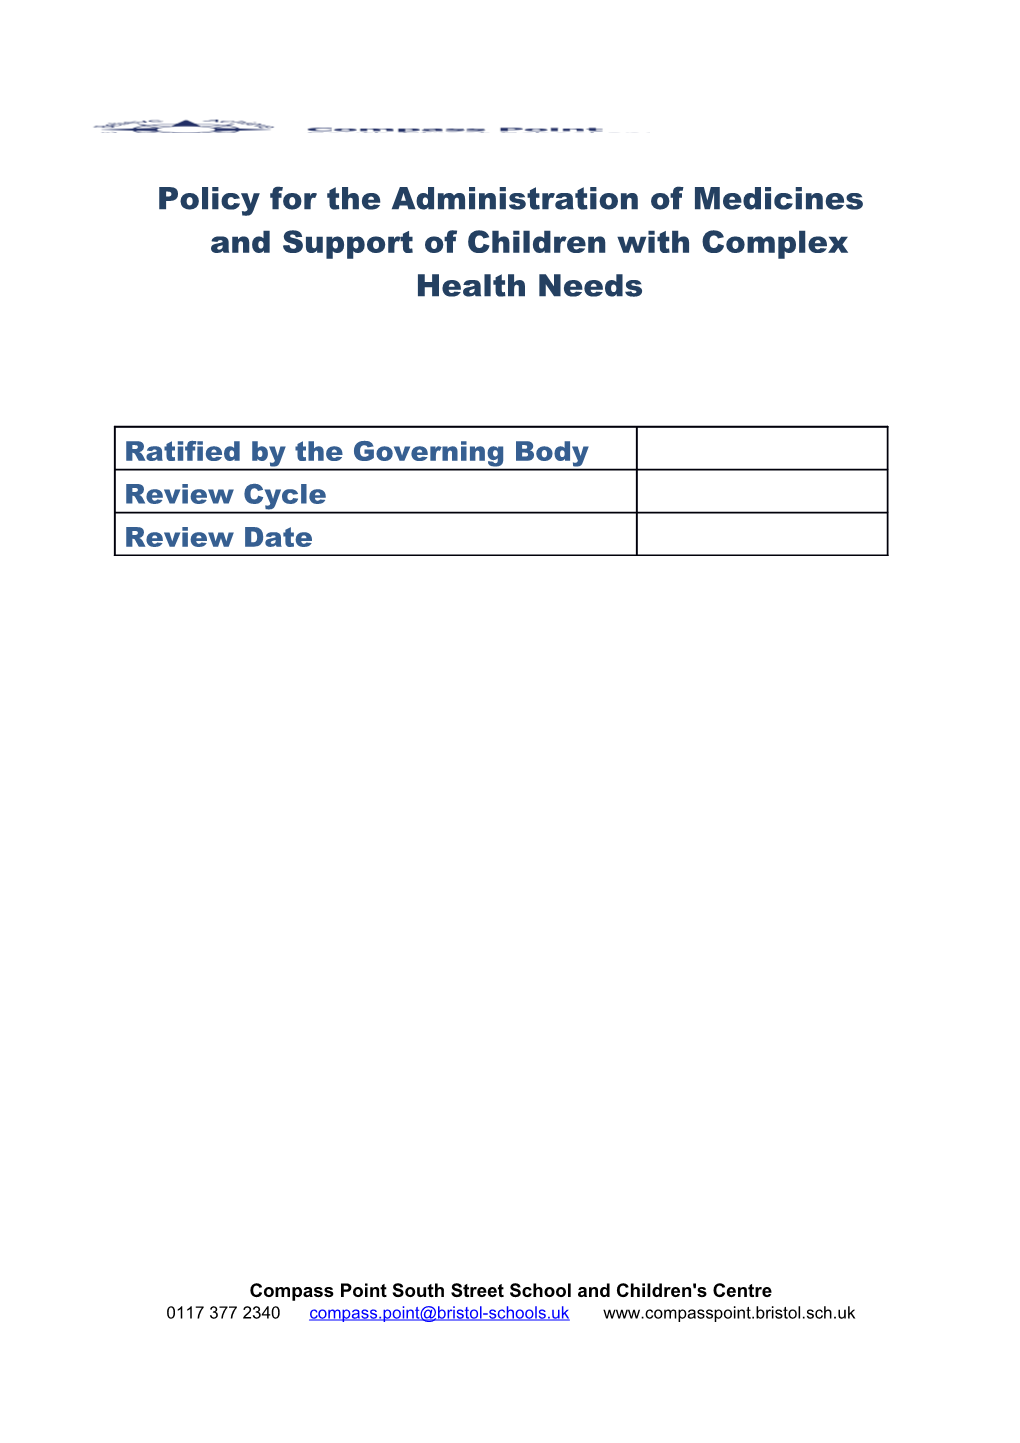 Policy for the Administration of Medicines and Support of Children with Complex Health Needs